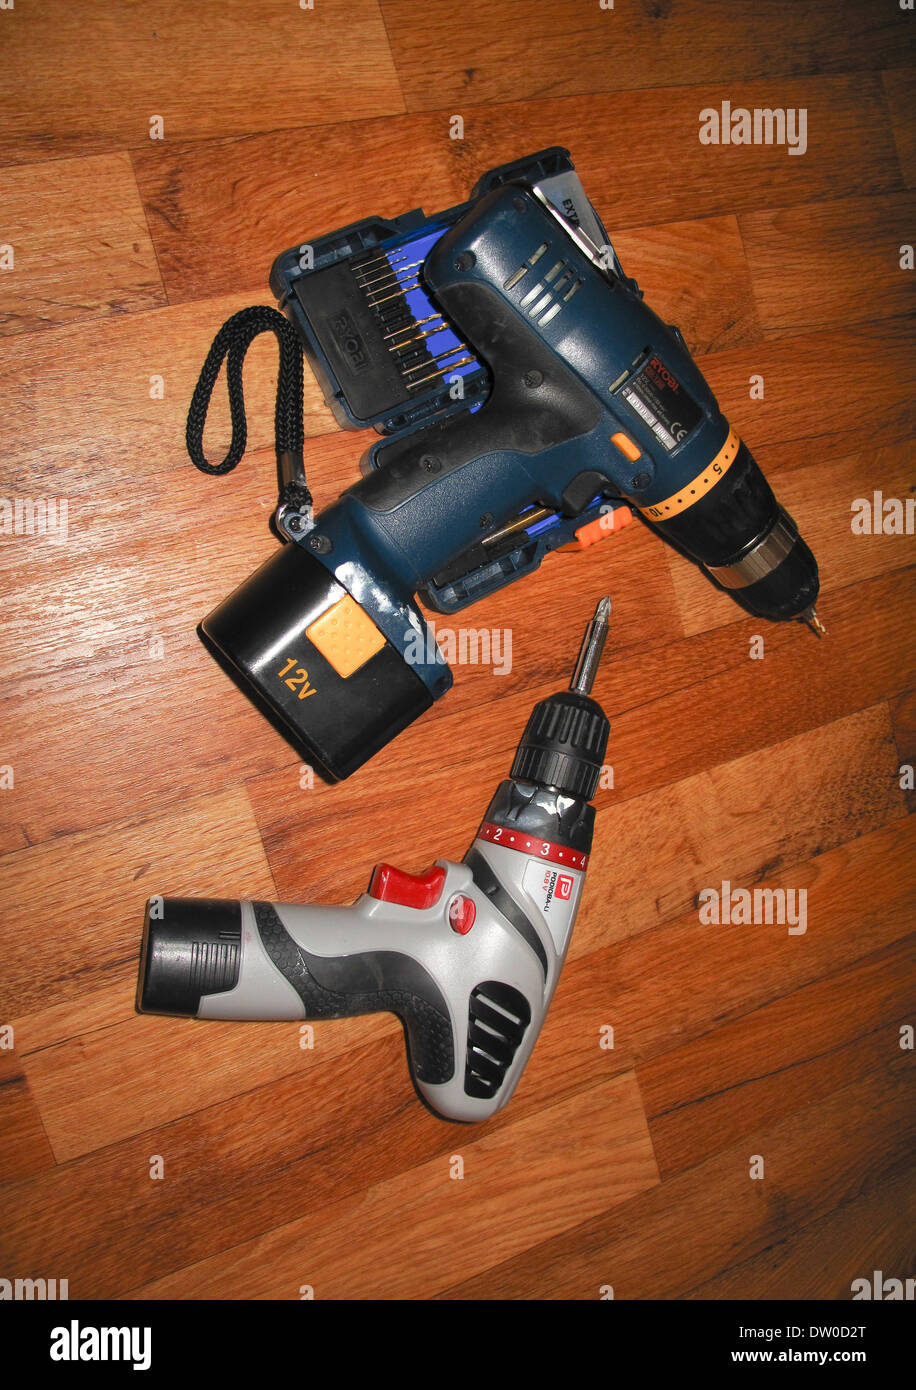 https://c8.alamy.com/comp/DW0D2T/cordless-rechargeable-drill-and-screwdriver-with-bits-DW0D2T.jpg